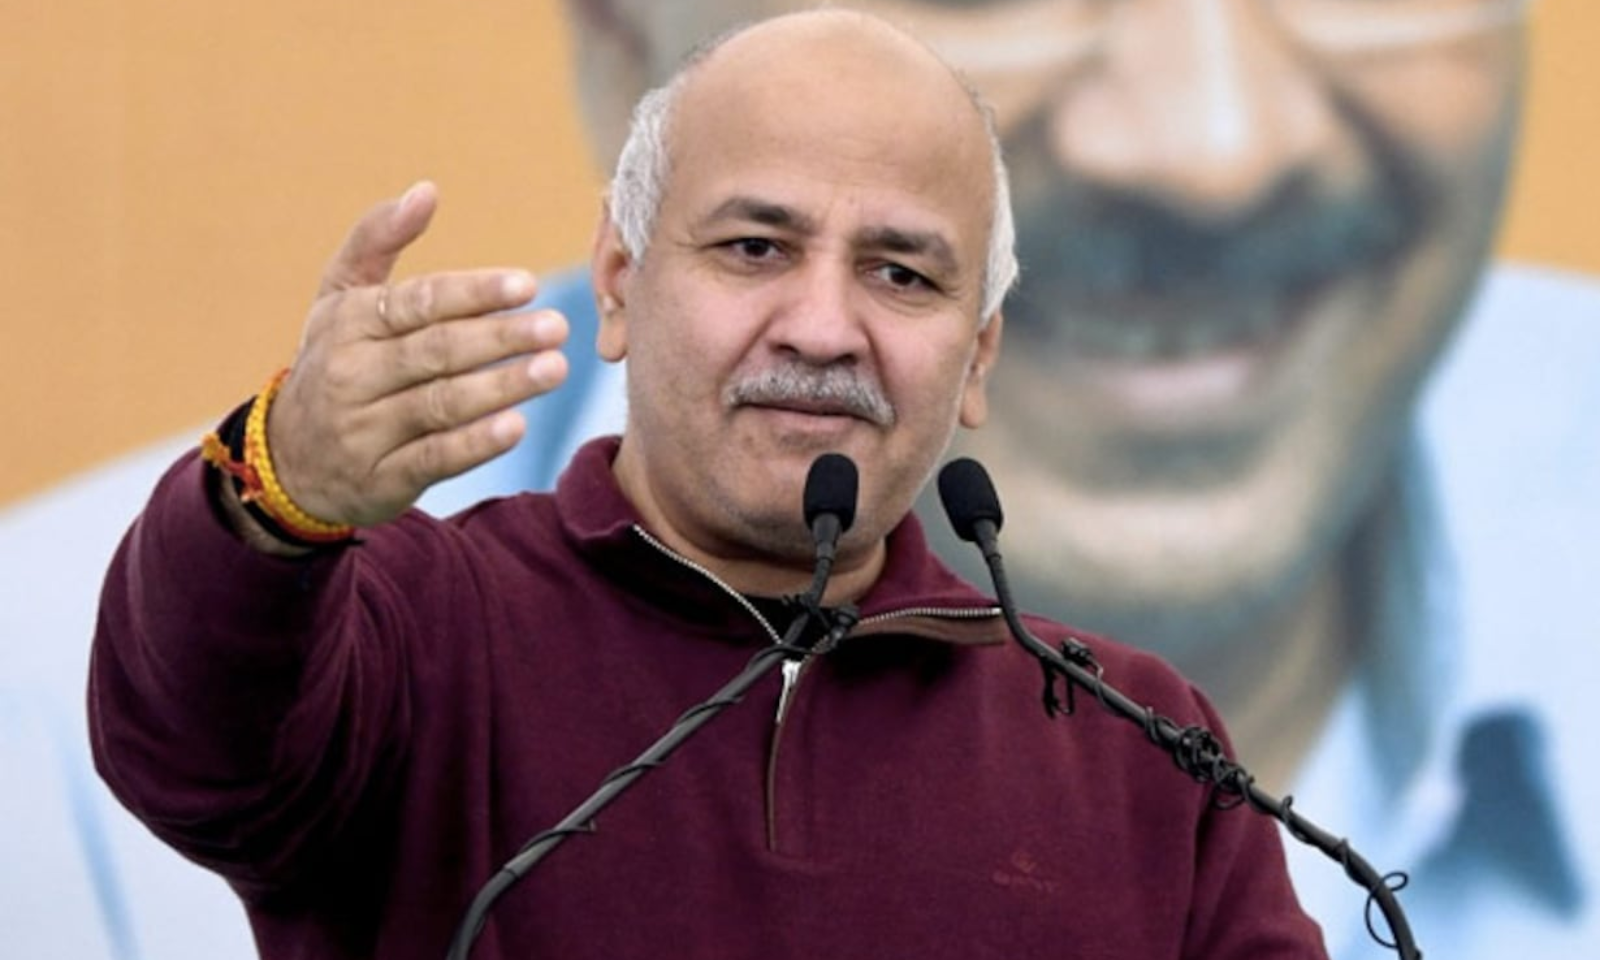 Manish Sisodia attacks PM Modi over his qualifications, writes letter from jail